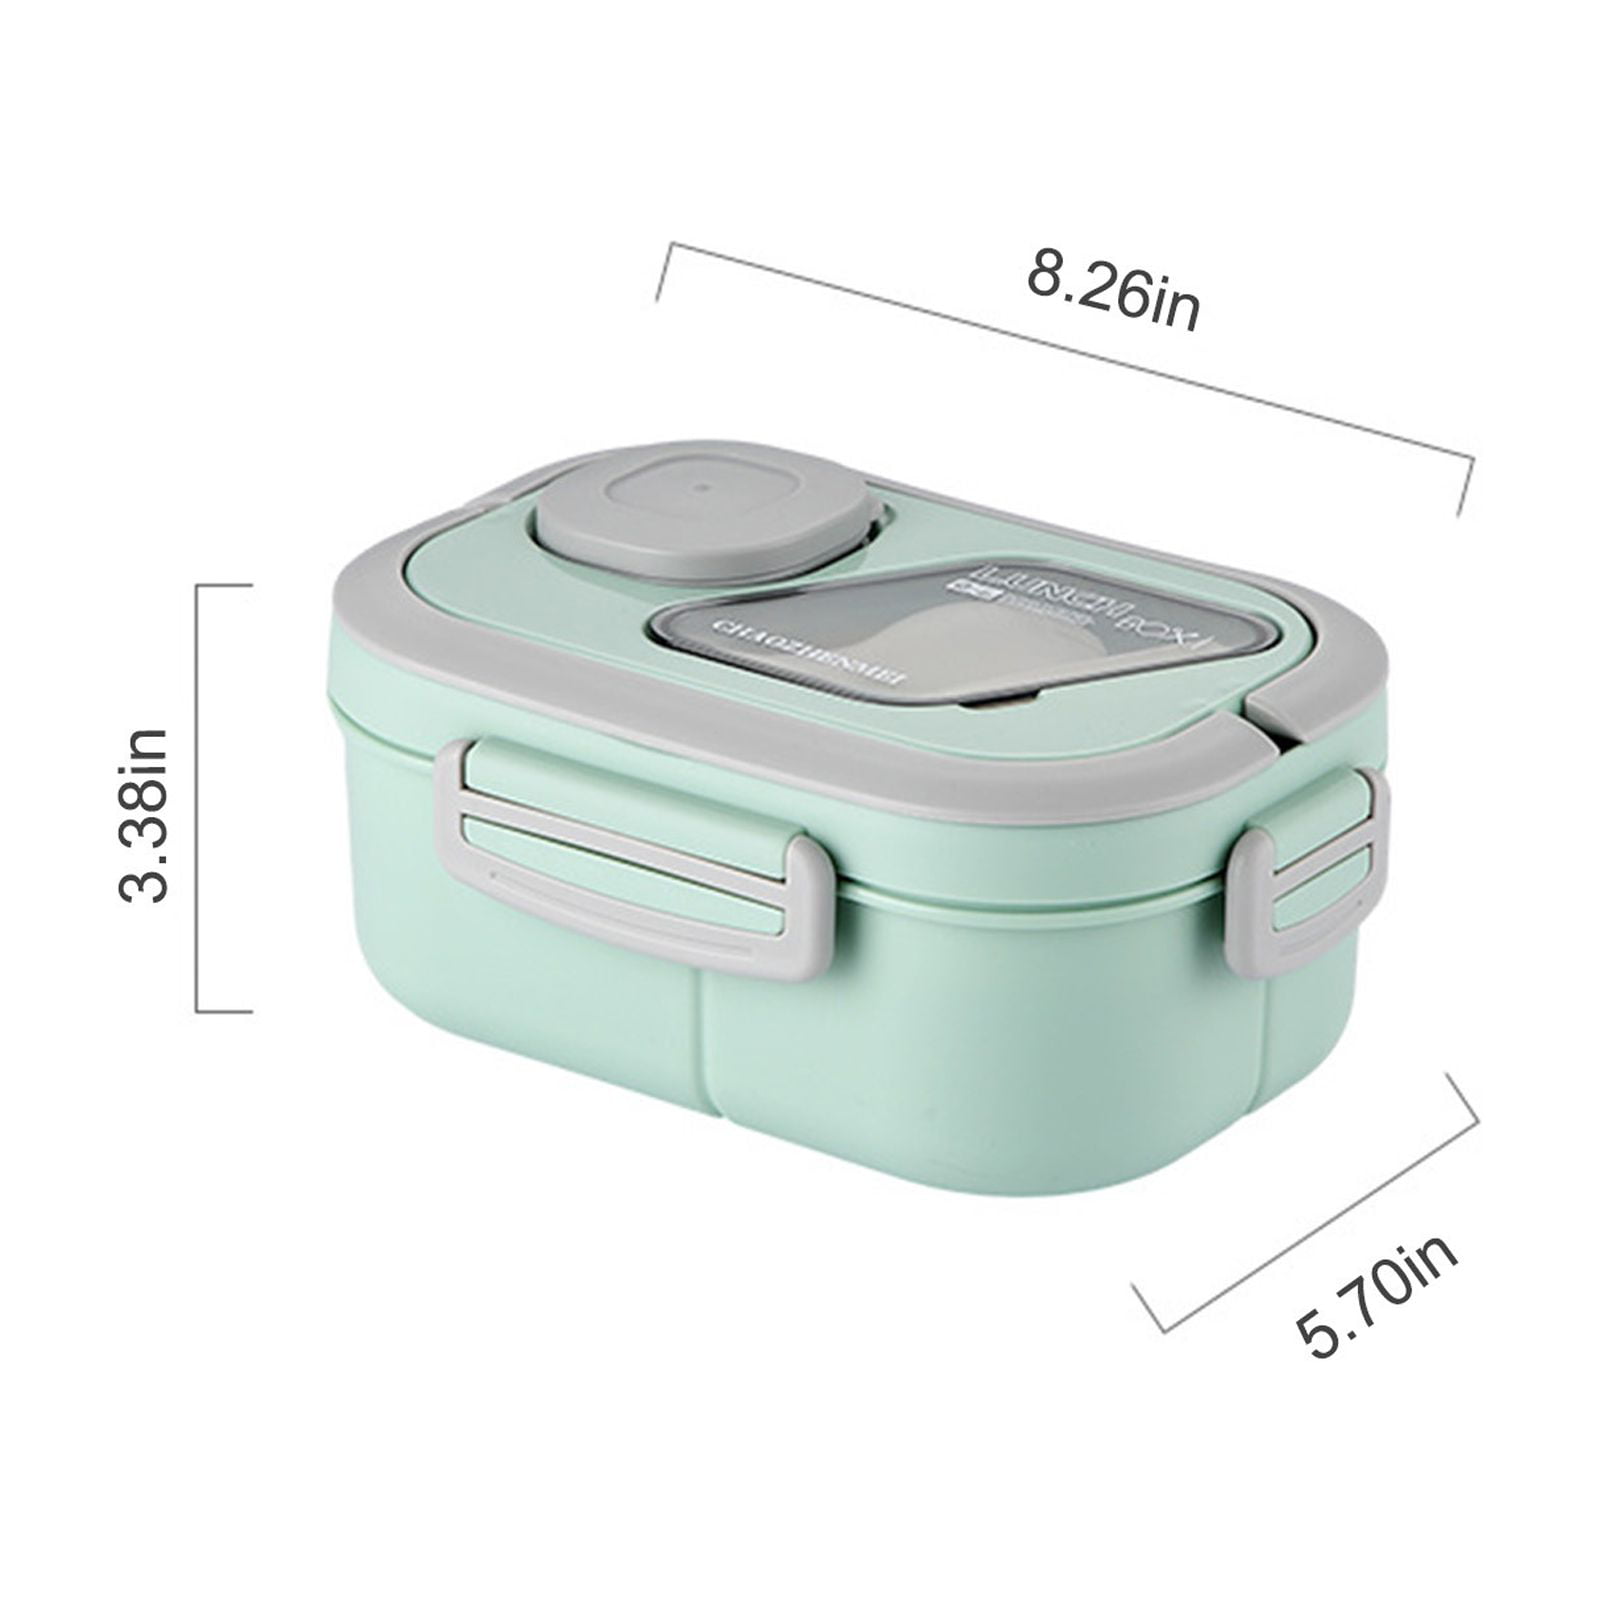 TiLeMiun 3-Tier Stackable Beoto Lunch Box, Thermal Lunch Box For Aldults To  Go Work, Portable Insula…See more TiLeMiun 3-Tier Stackable Beoto Lunch